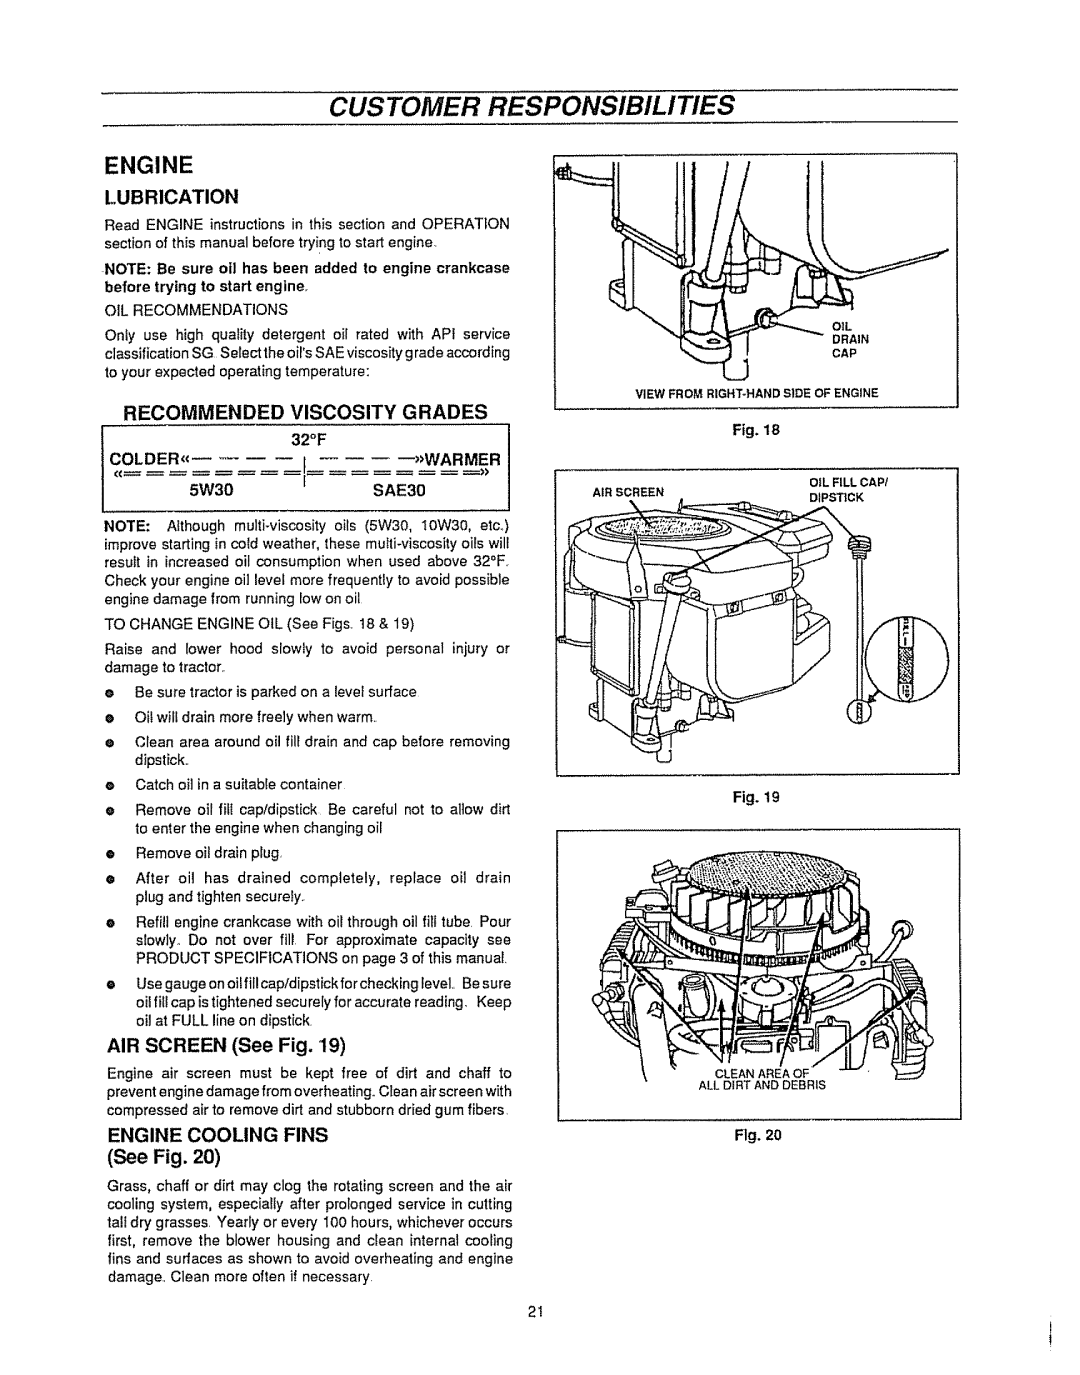 Sears 536.25587 owner manual Engine, Customer Responsibilities, Recommended, Viscosity, Grades, See Fig 